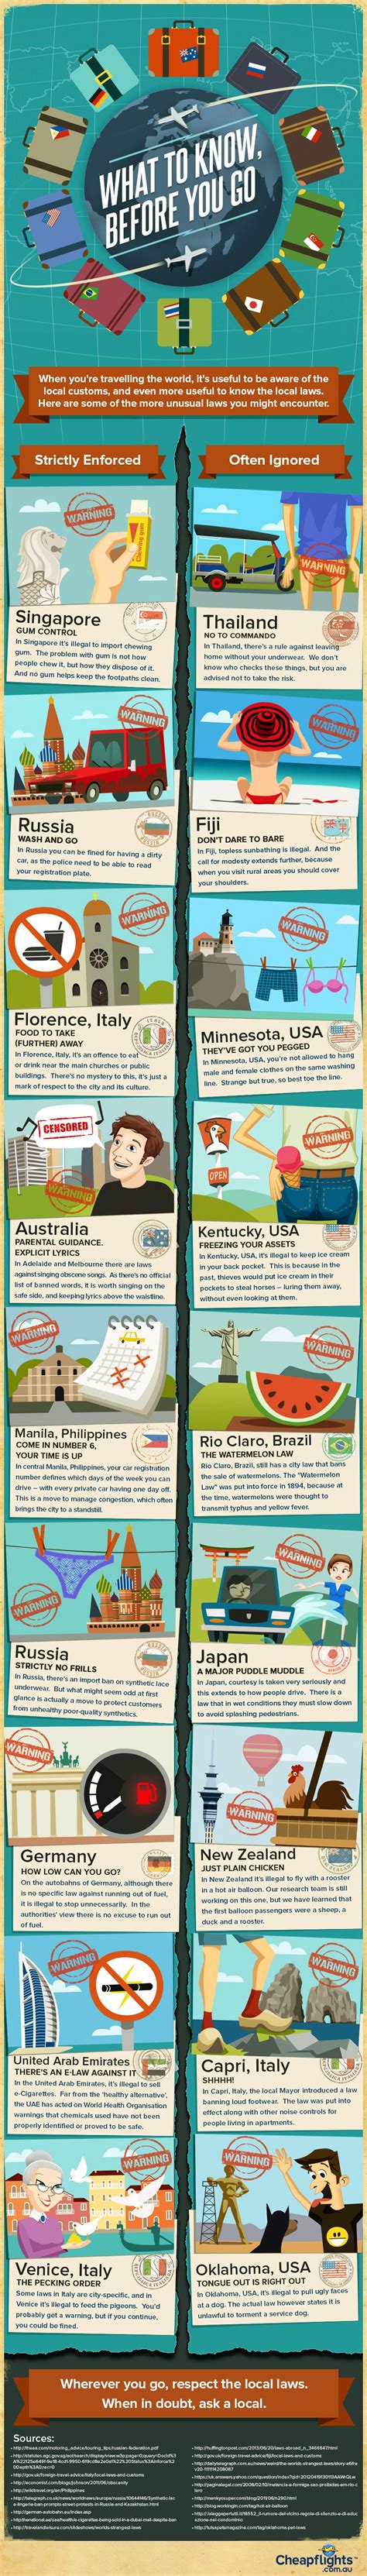 Strange Laws Around The World Infographic Daily Infographic Travel Guides Travel Tips